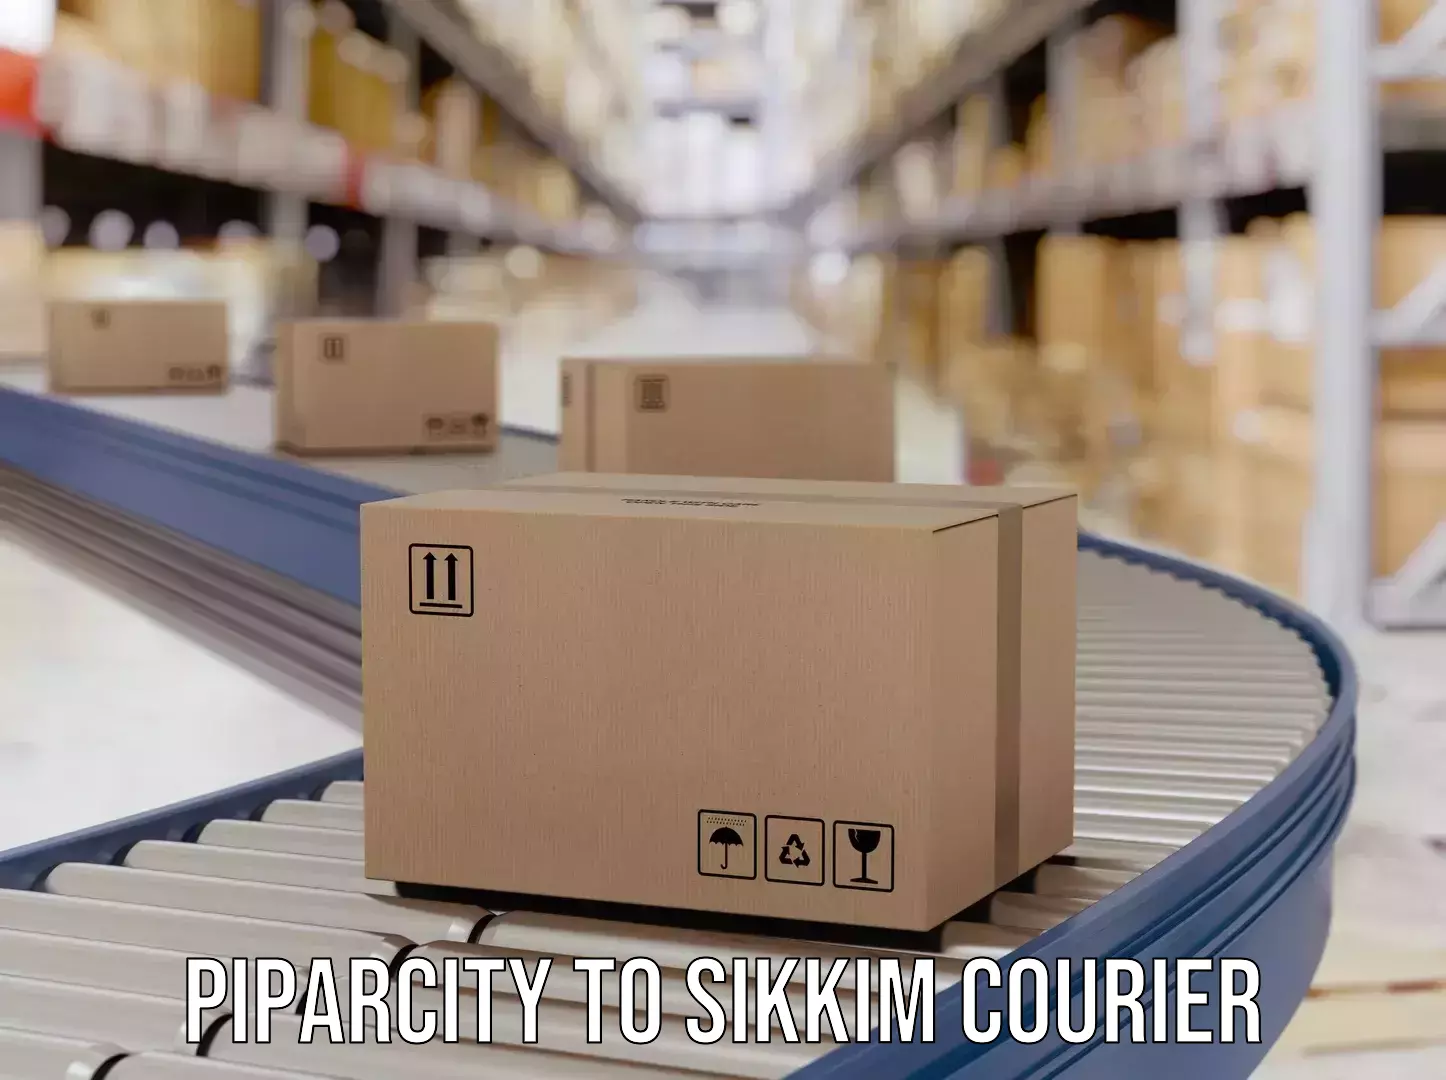 Round-the-clock parcel delivery Piparcity to South Sikkim